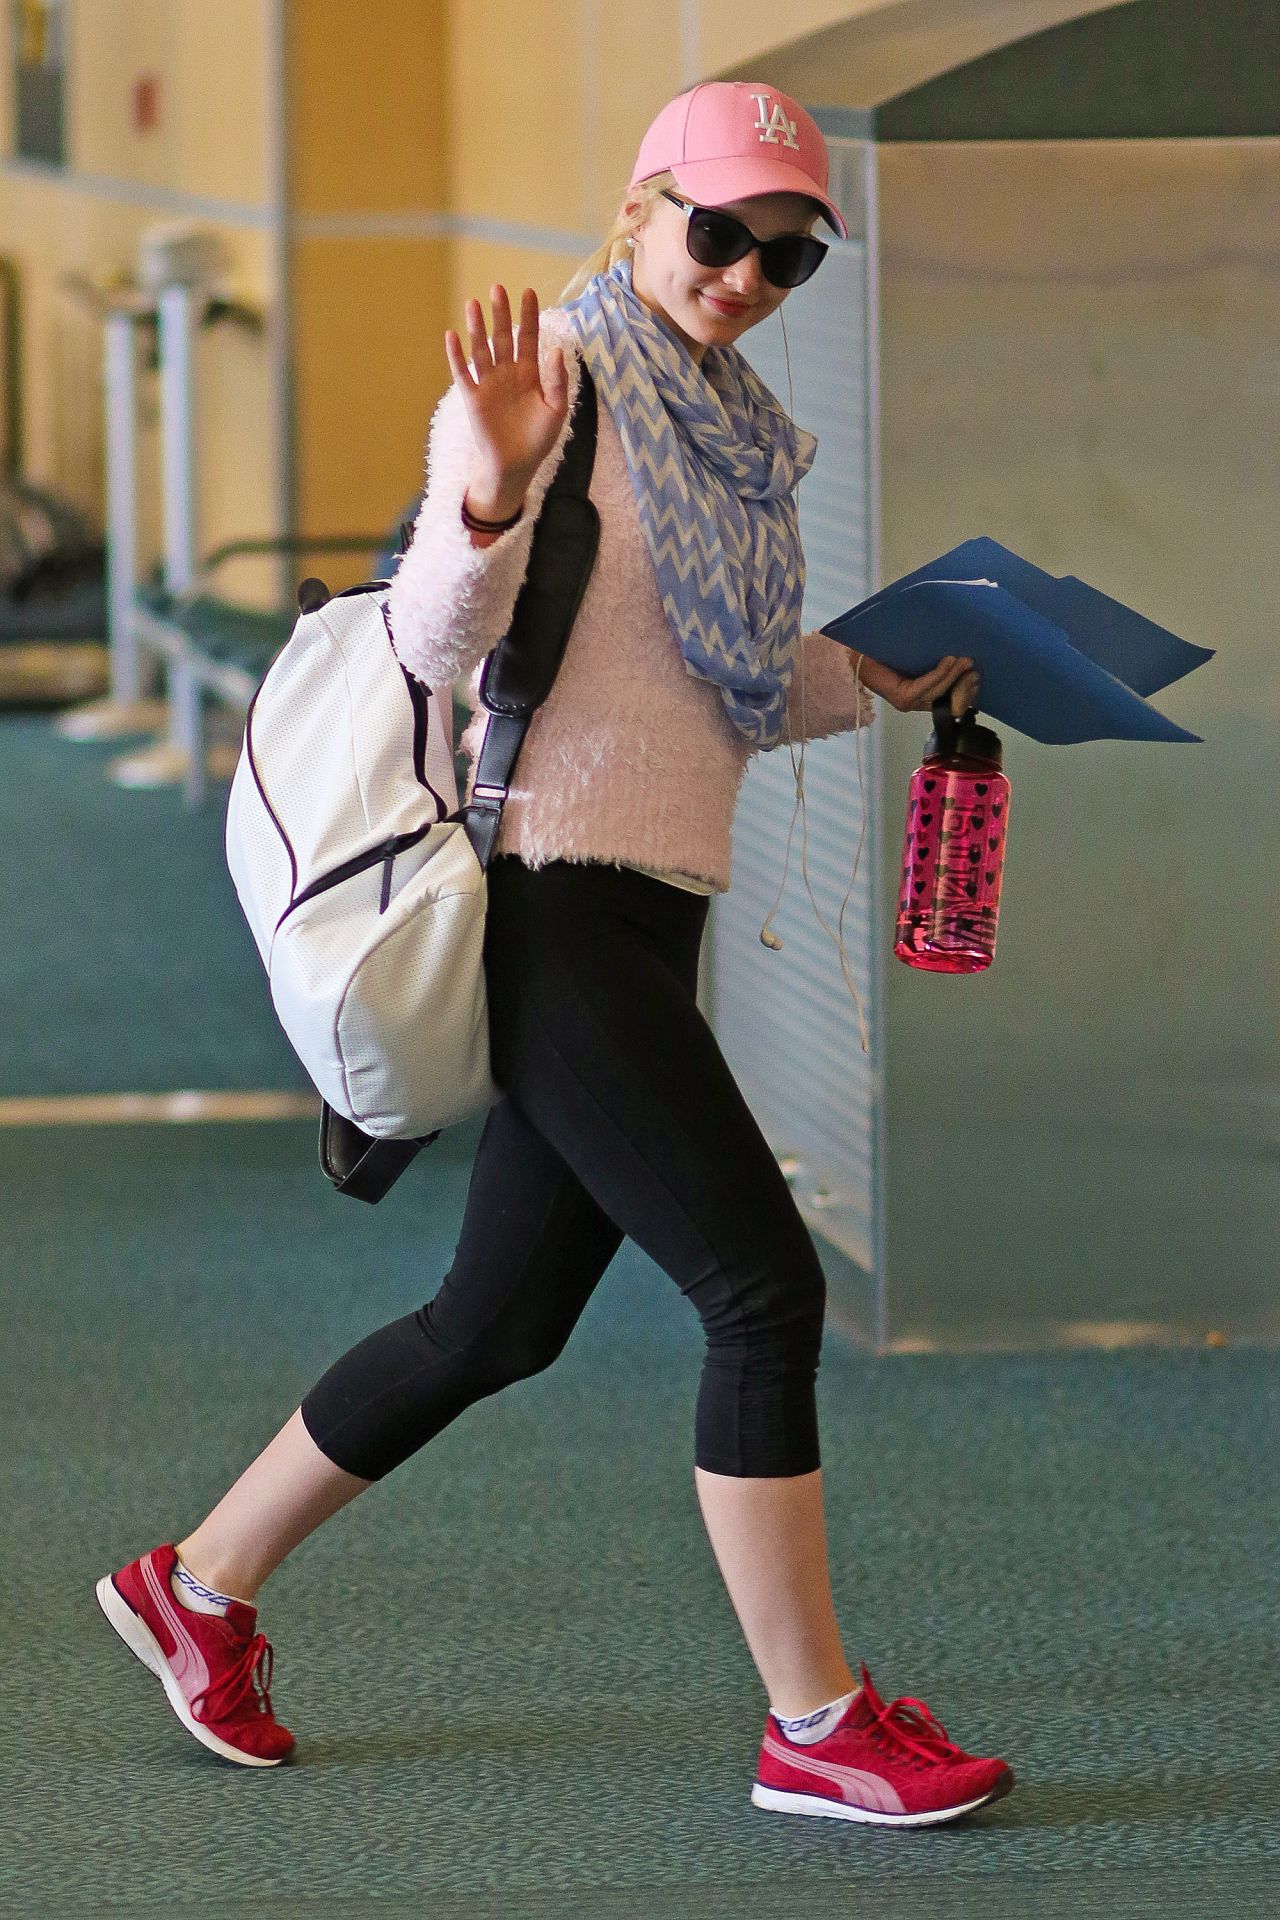 dove-cameron-booty-in-leggings-vancouver-airport-february-2015_11.